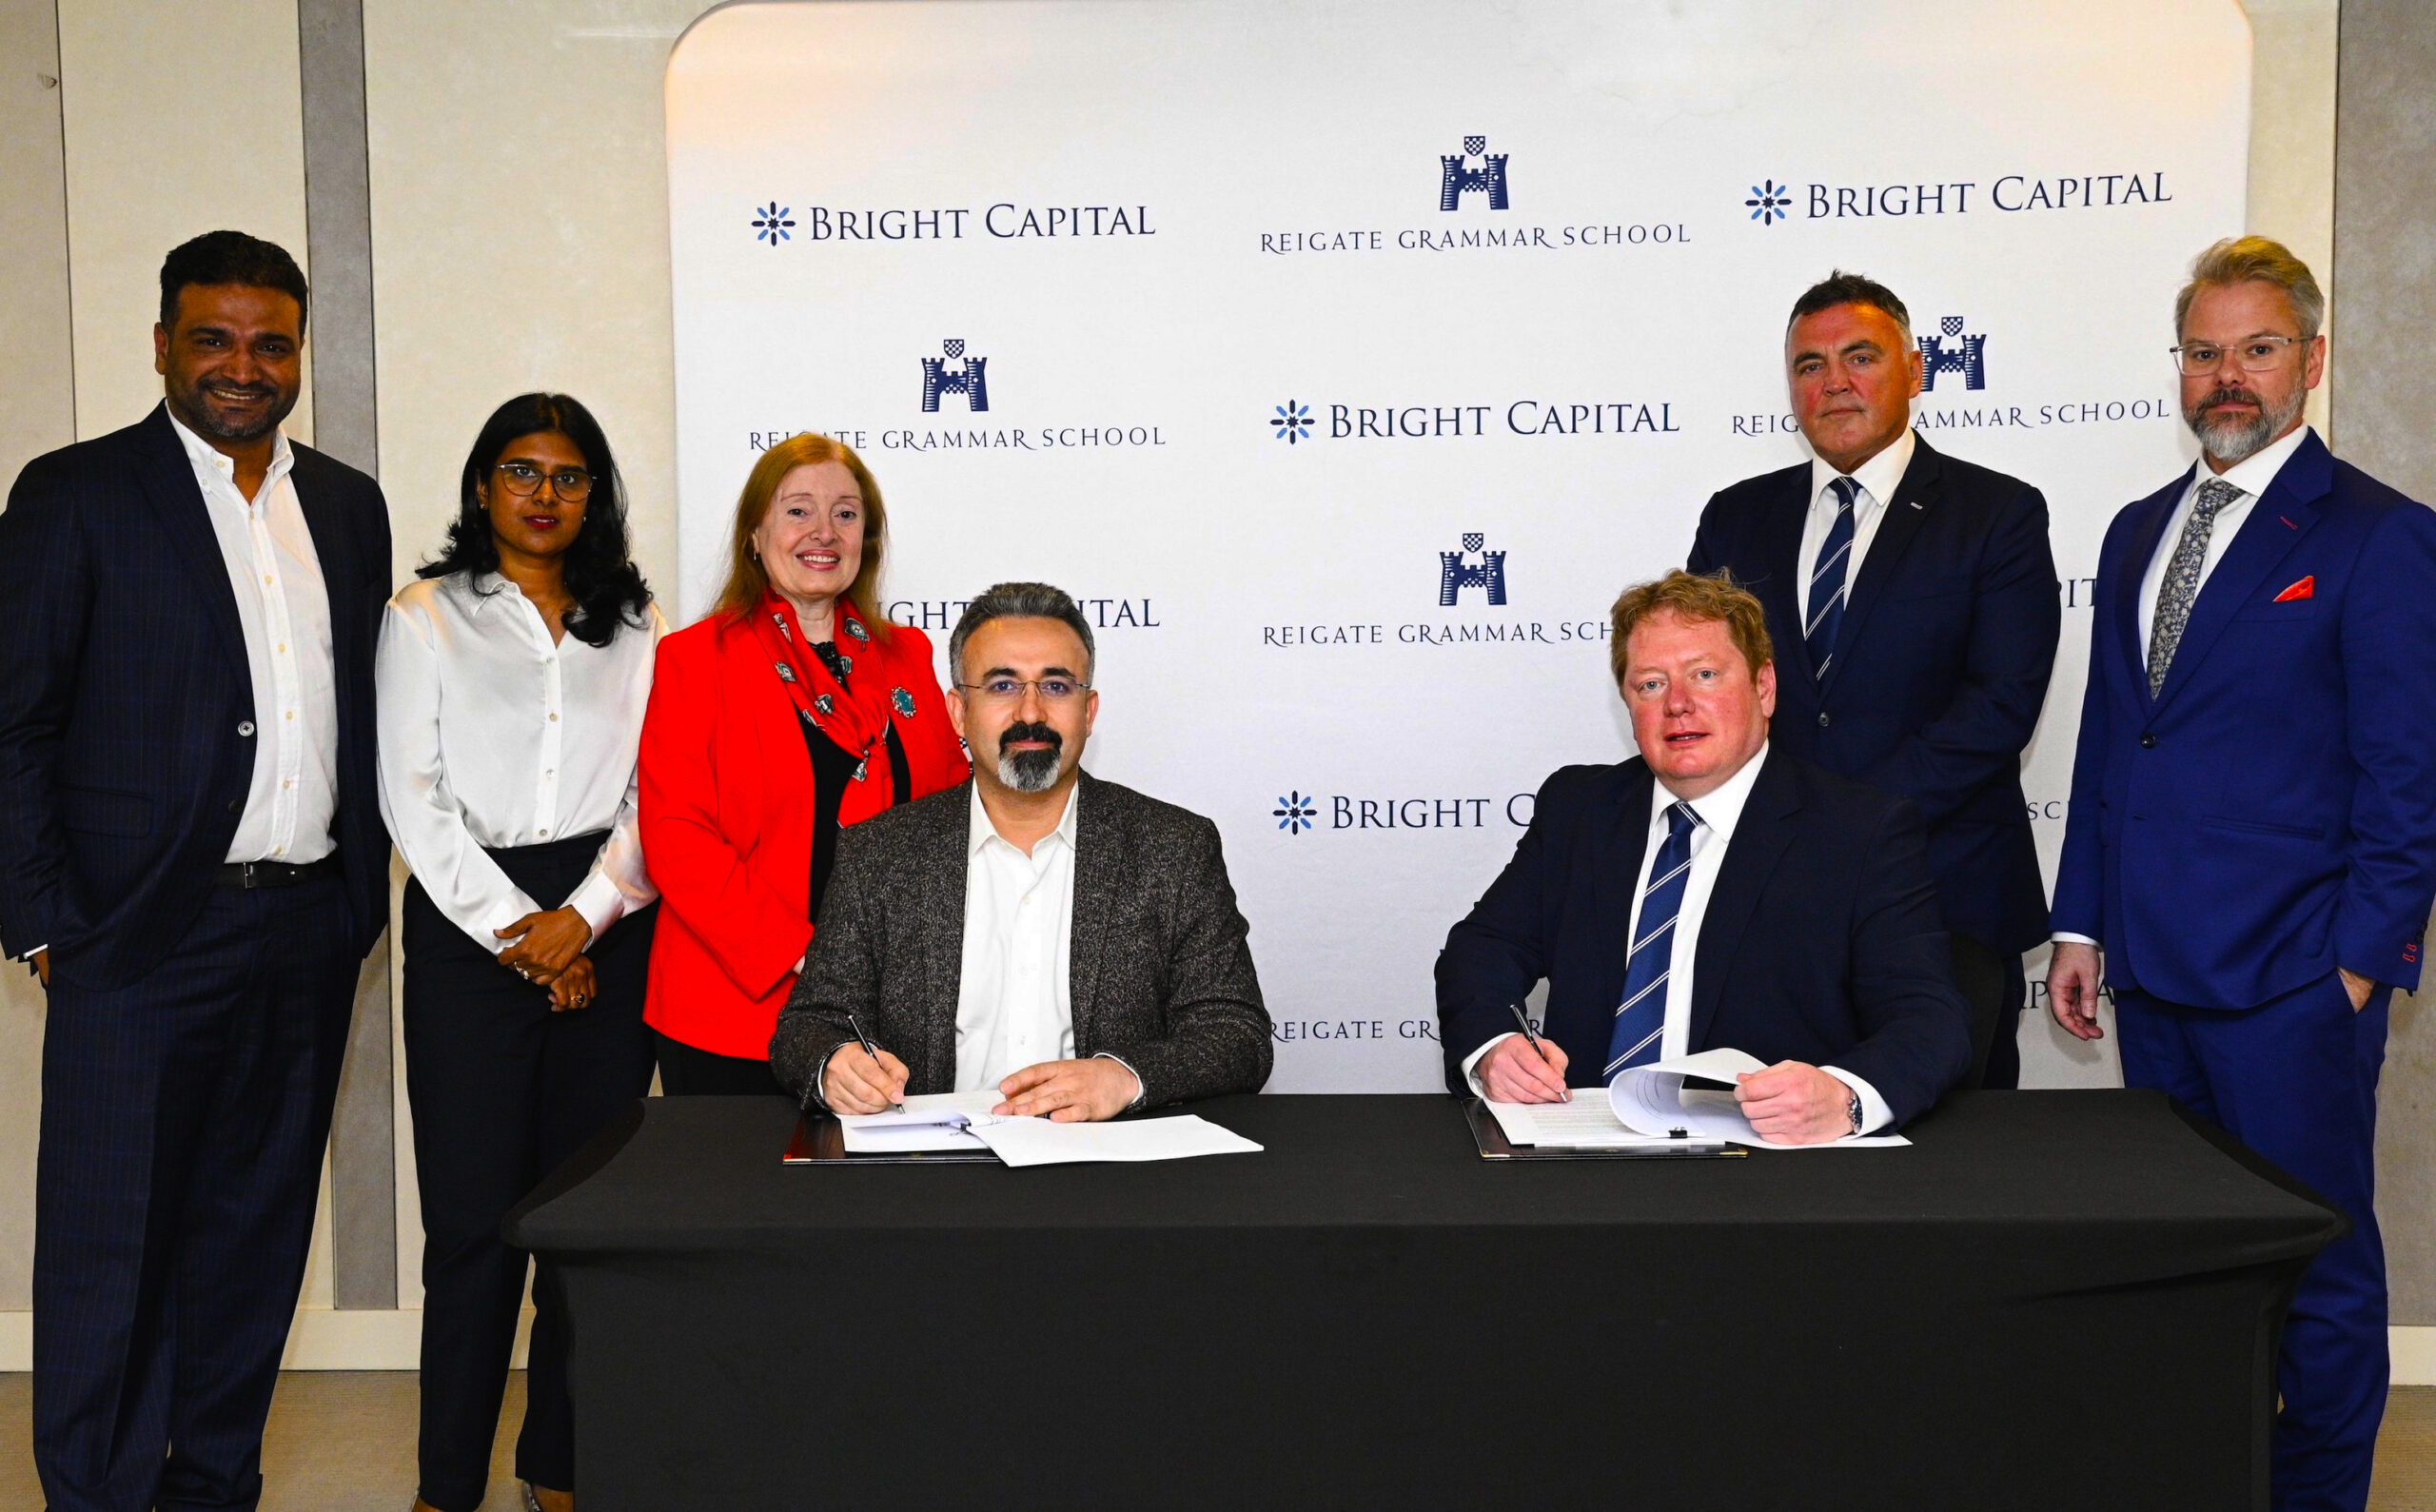 Reigate Grammar School UAE partnership could see opening for RGS Dubai, RGS Abu Dhabi and RGS Al Ain. the school should not be confused with Royal Grammar School Dubai, also confusingly known as RGS